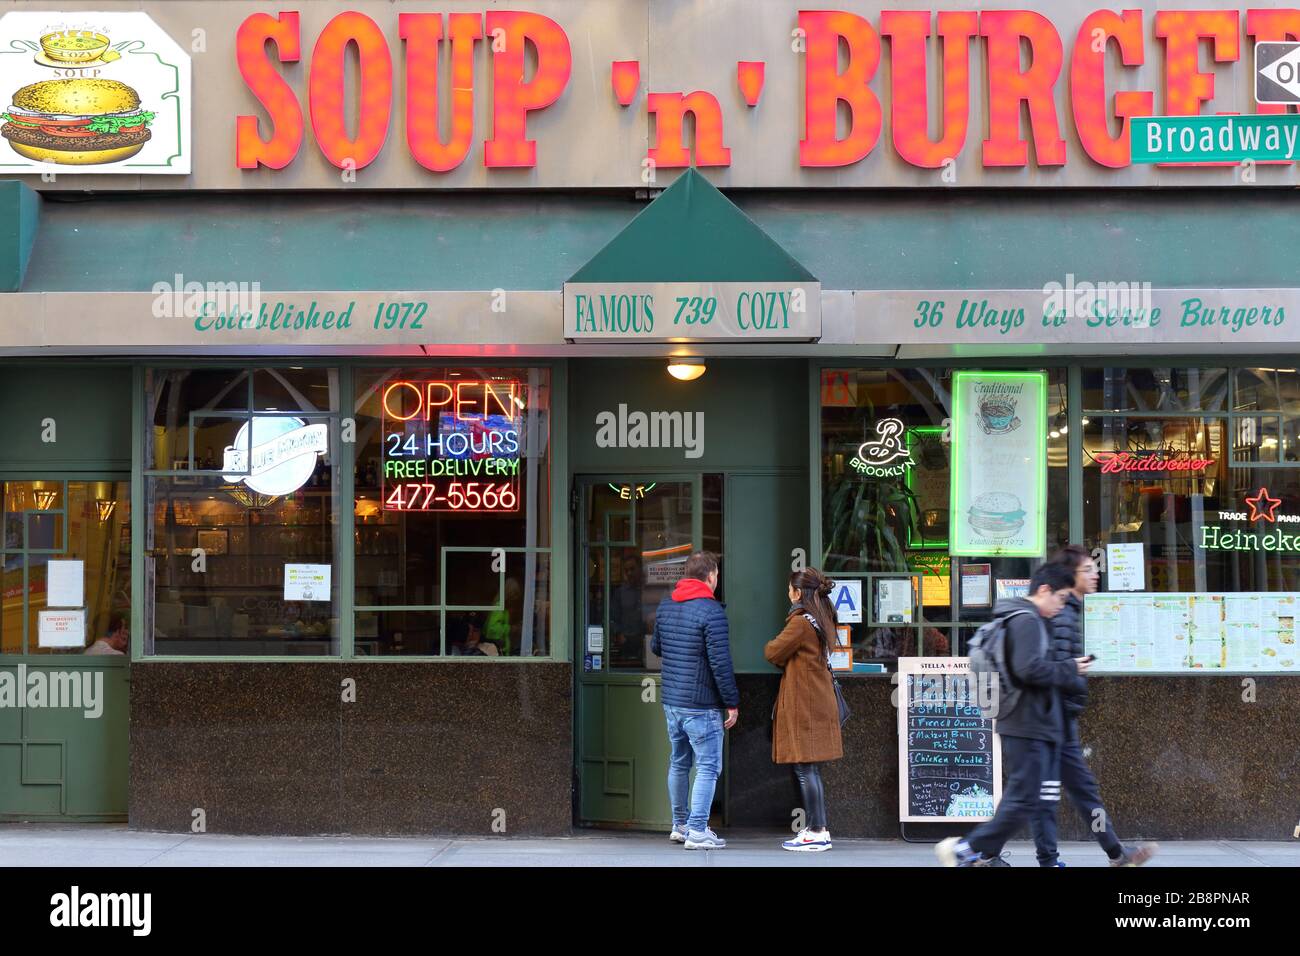 Famous Cozy Soup & Burger, 739 Broadway, New York. NYC storefront photo of a diner restaurant in the East Village of Manhattan. Stock Photo